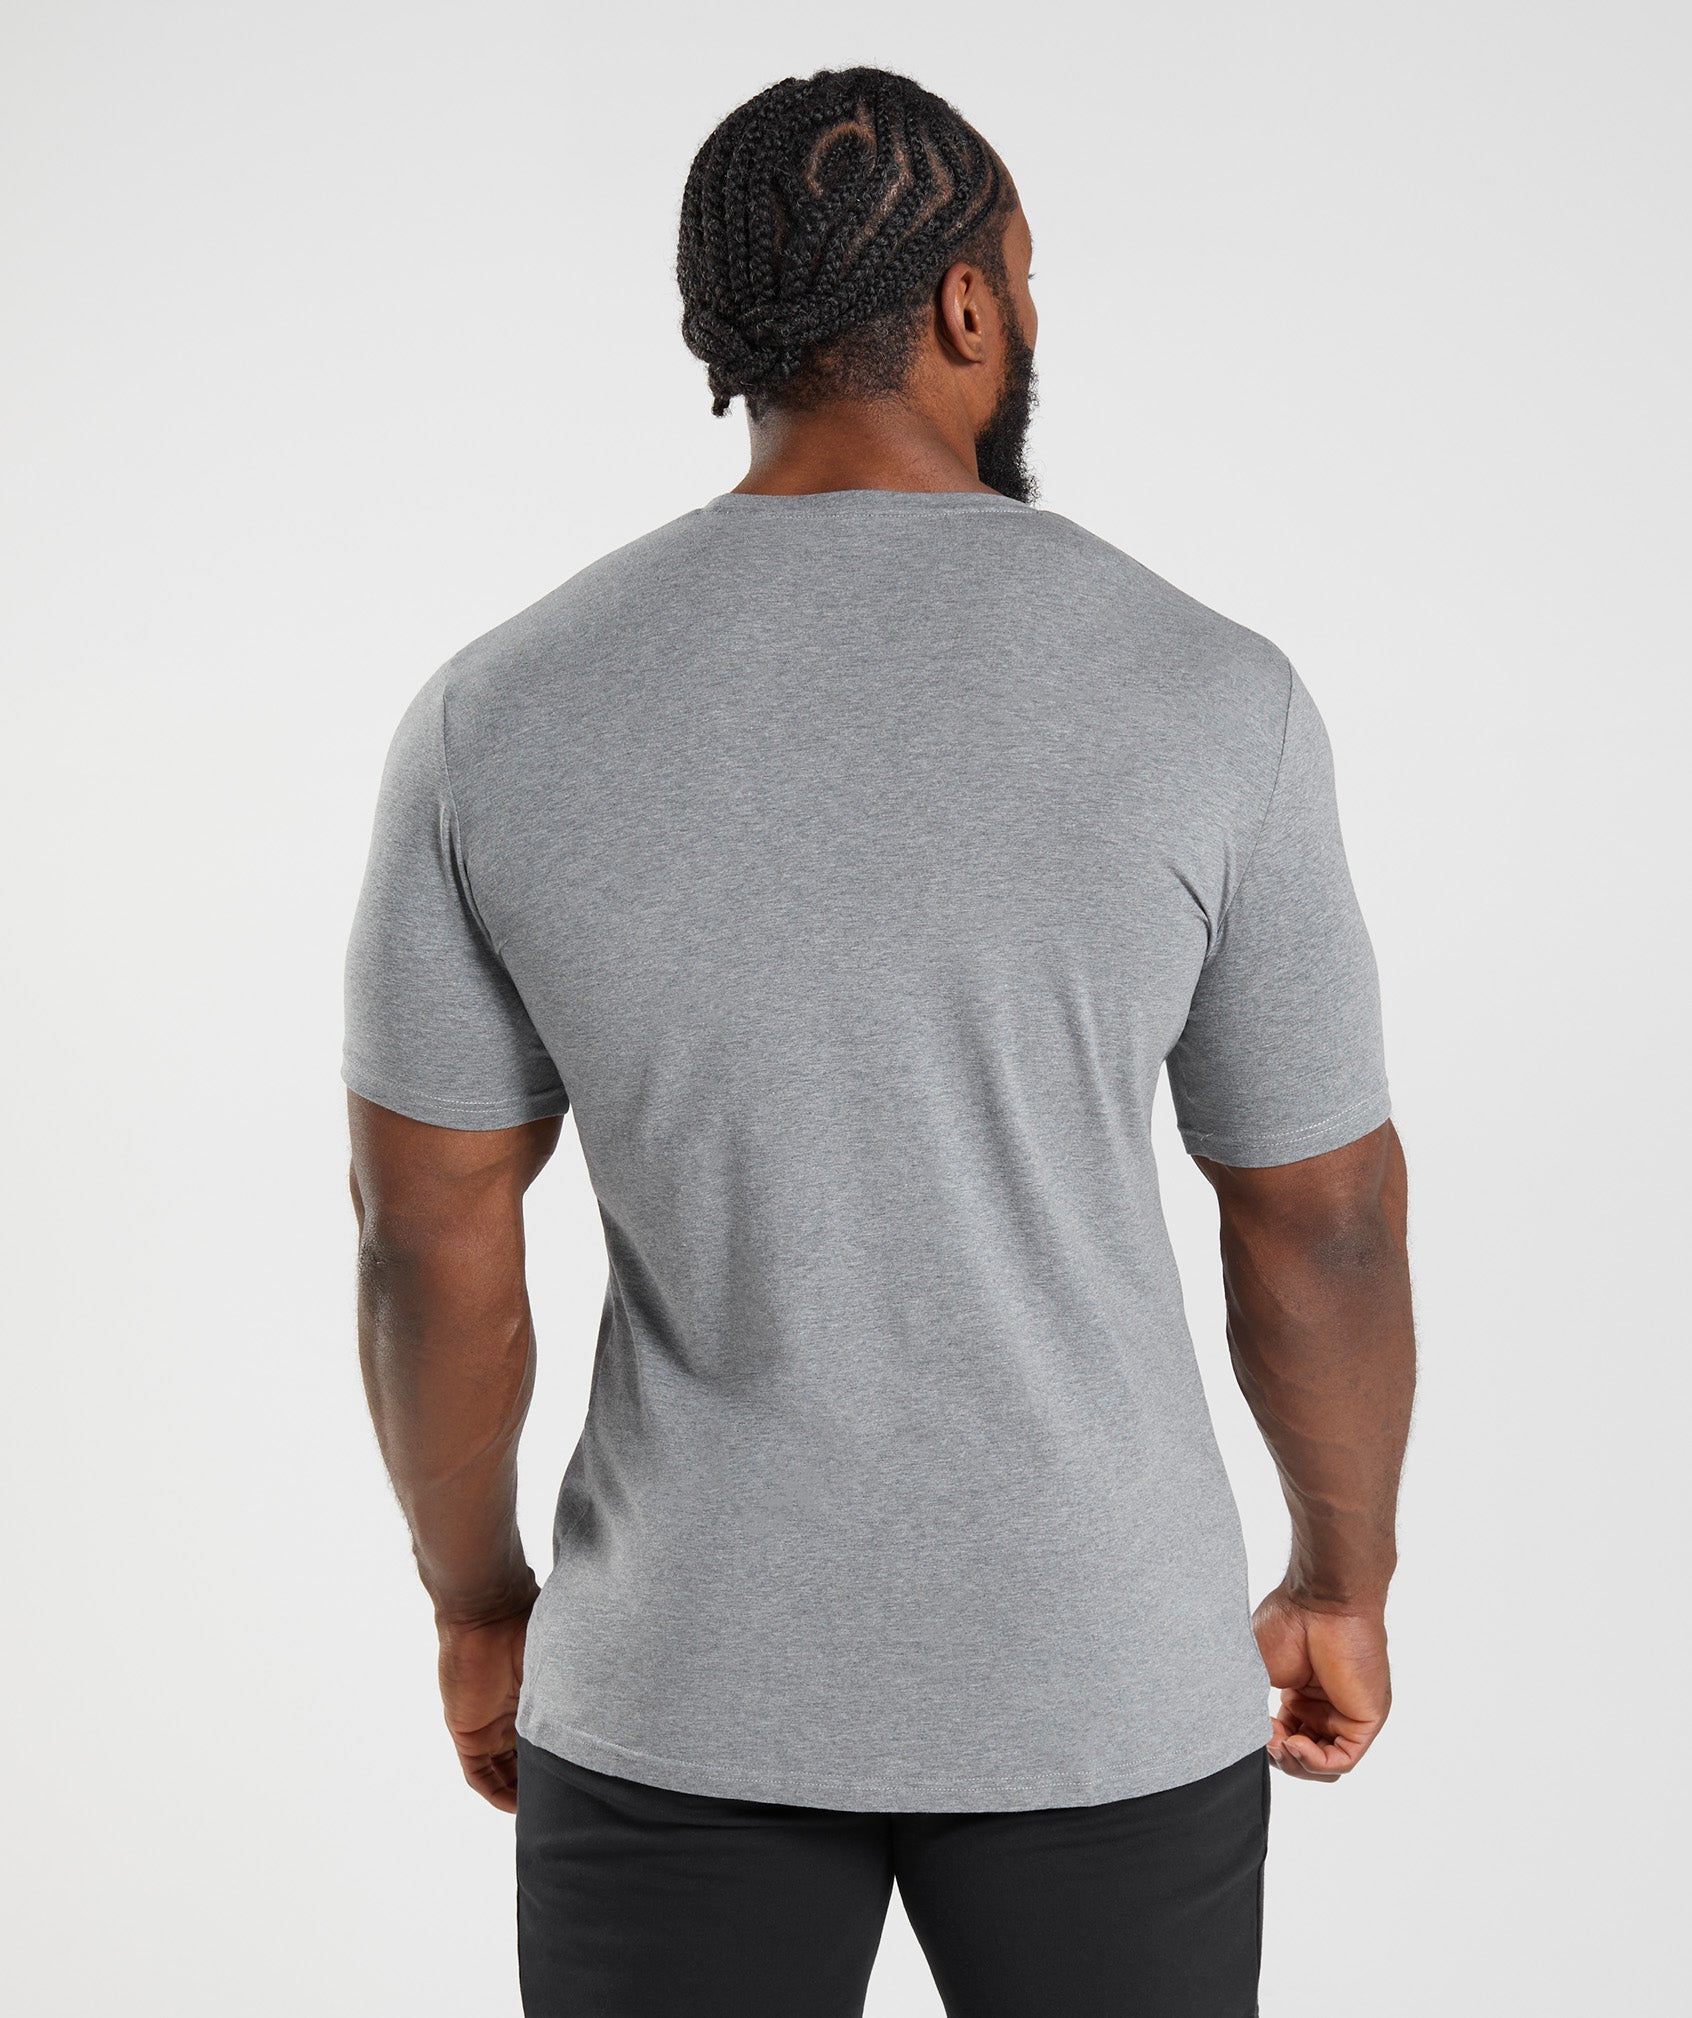 Essential T-Shirt in Charcoal Grey Marl